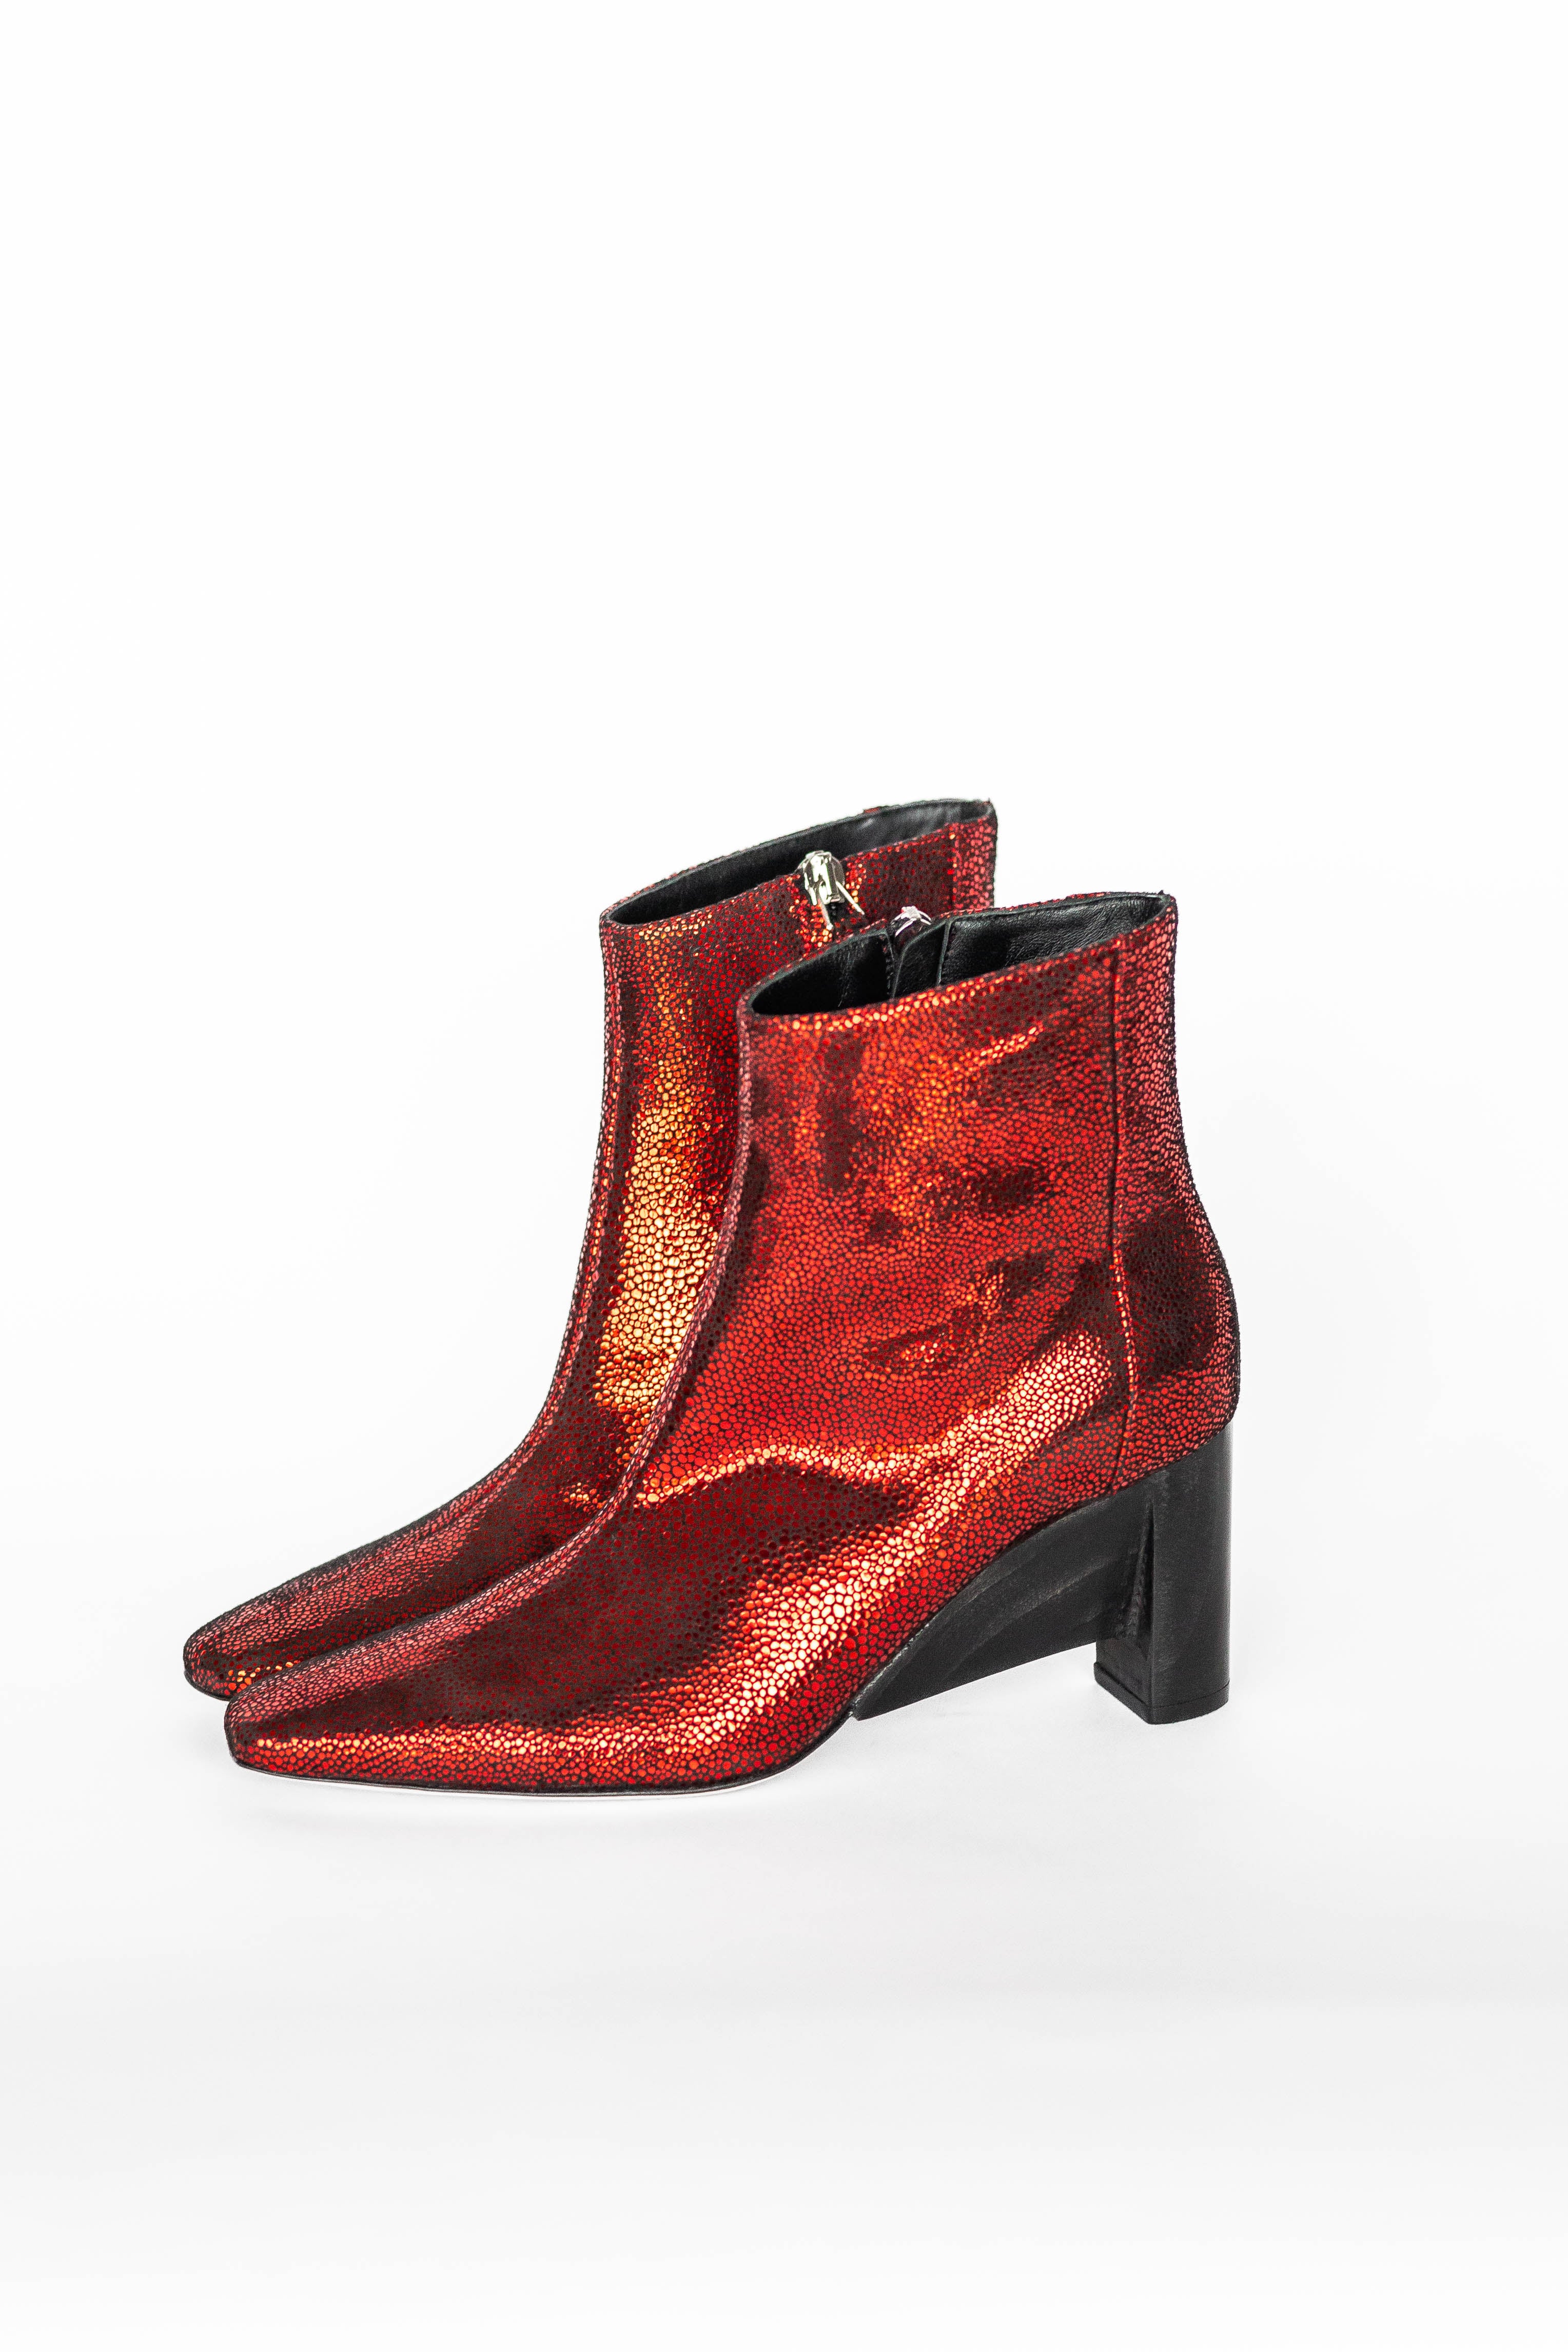 Lia Boot-Metallic Suede Speckle Red/Black